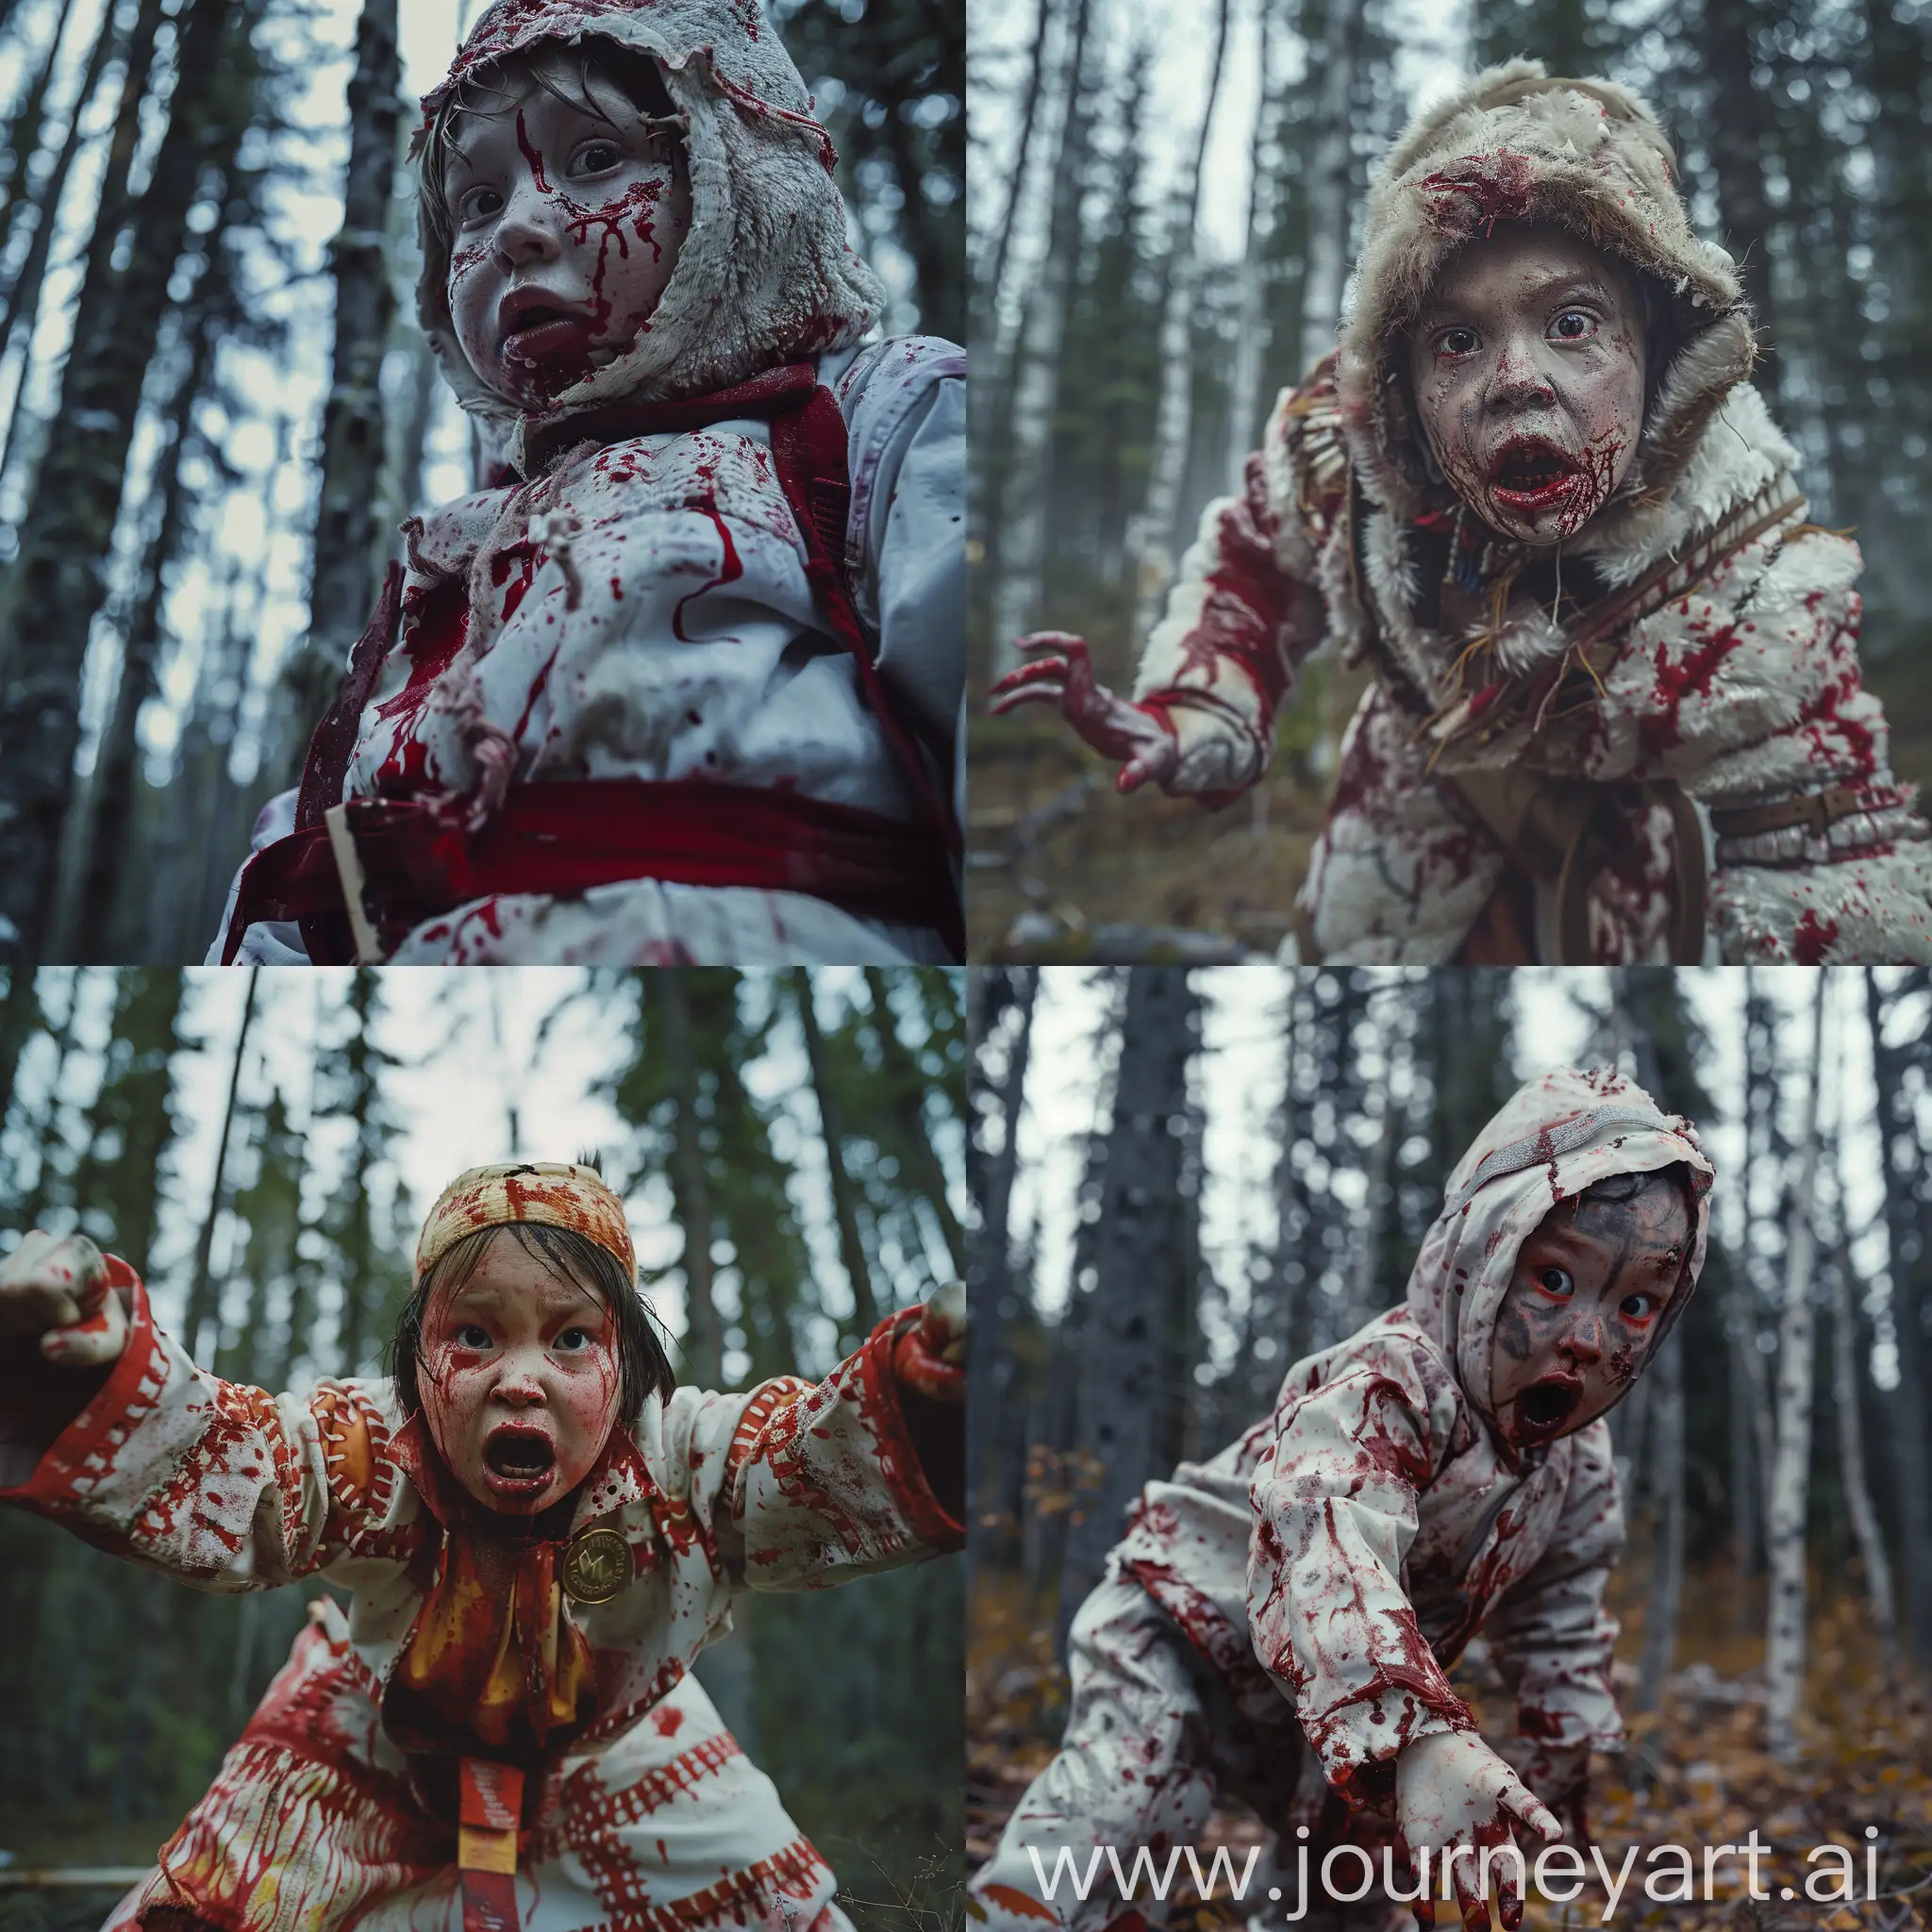 Eerie-Encounter-Deformed-Child-in-BloodStained-Eskimo-Clothes-Stares-Down-Camera-in-Alaskan-Woods